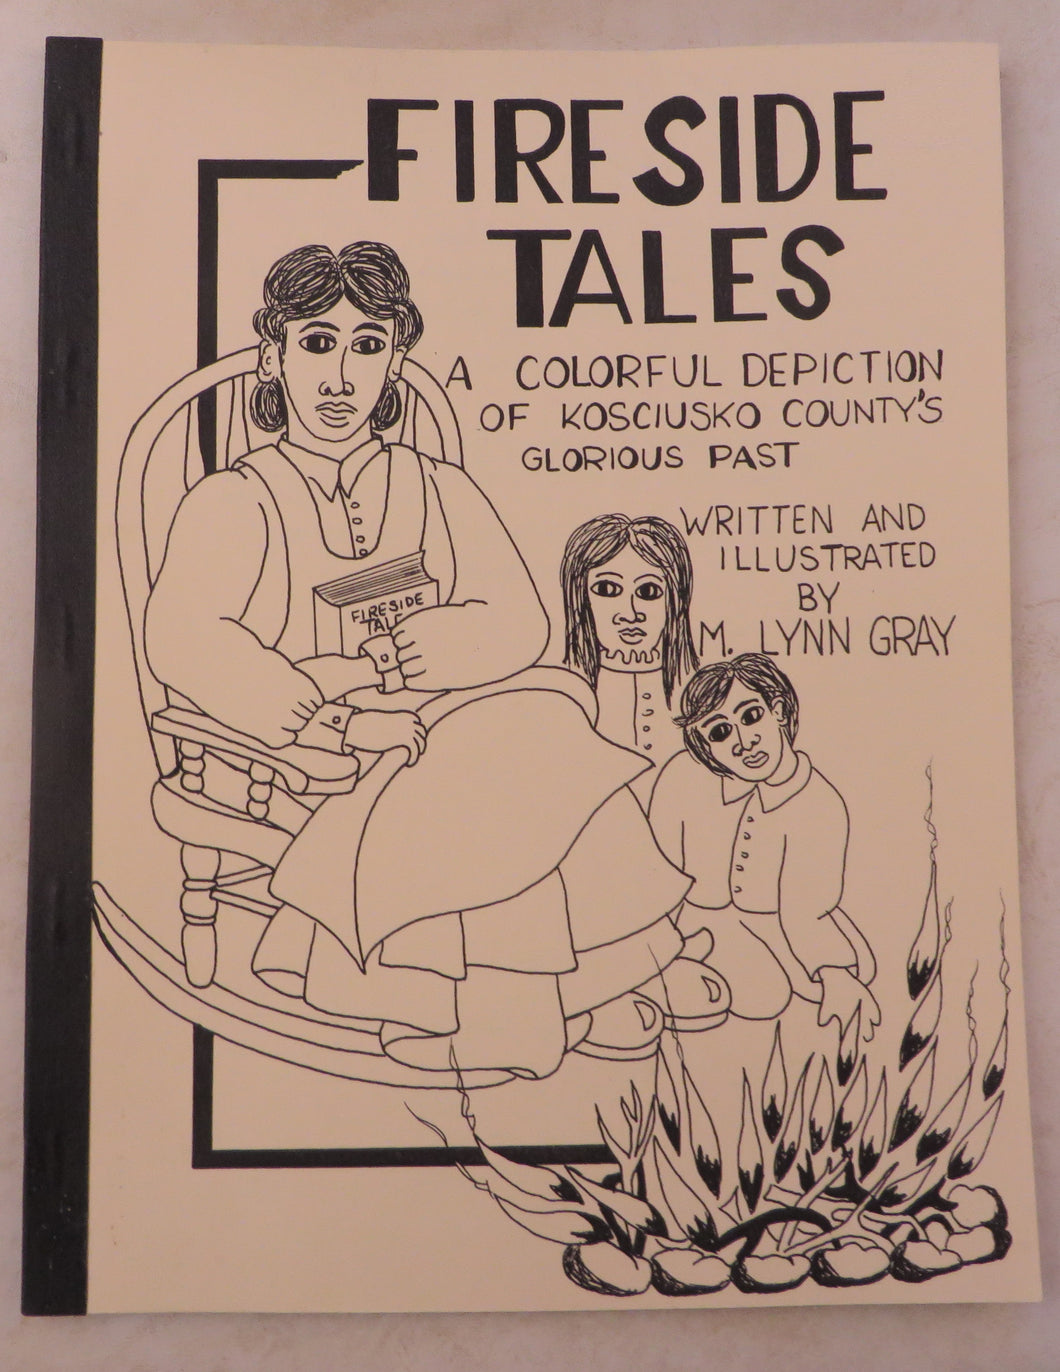 Fireside Tales - A Colorful Depiction of Kosciusko County's Glorious Past